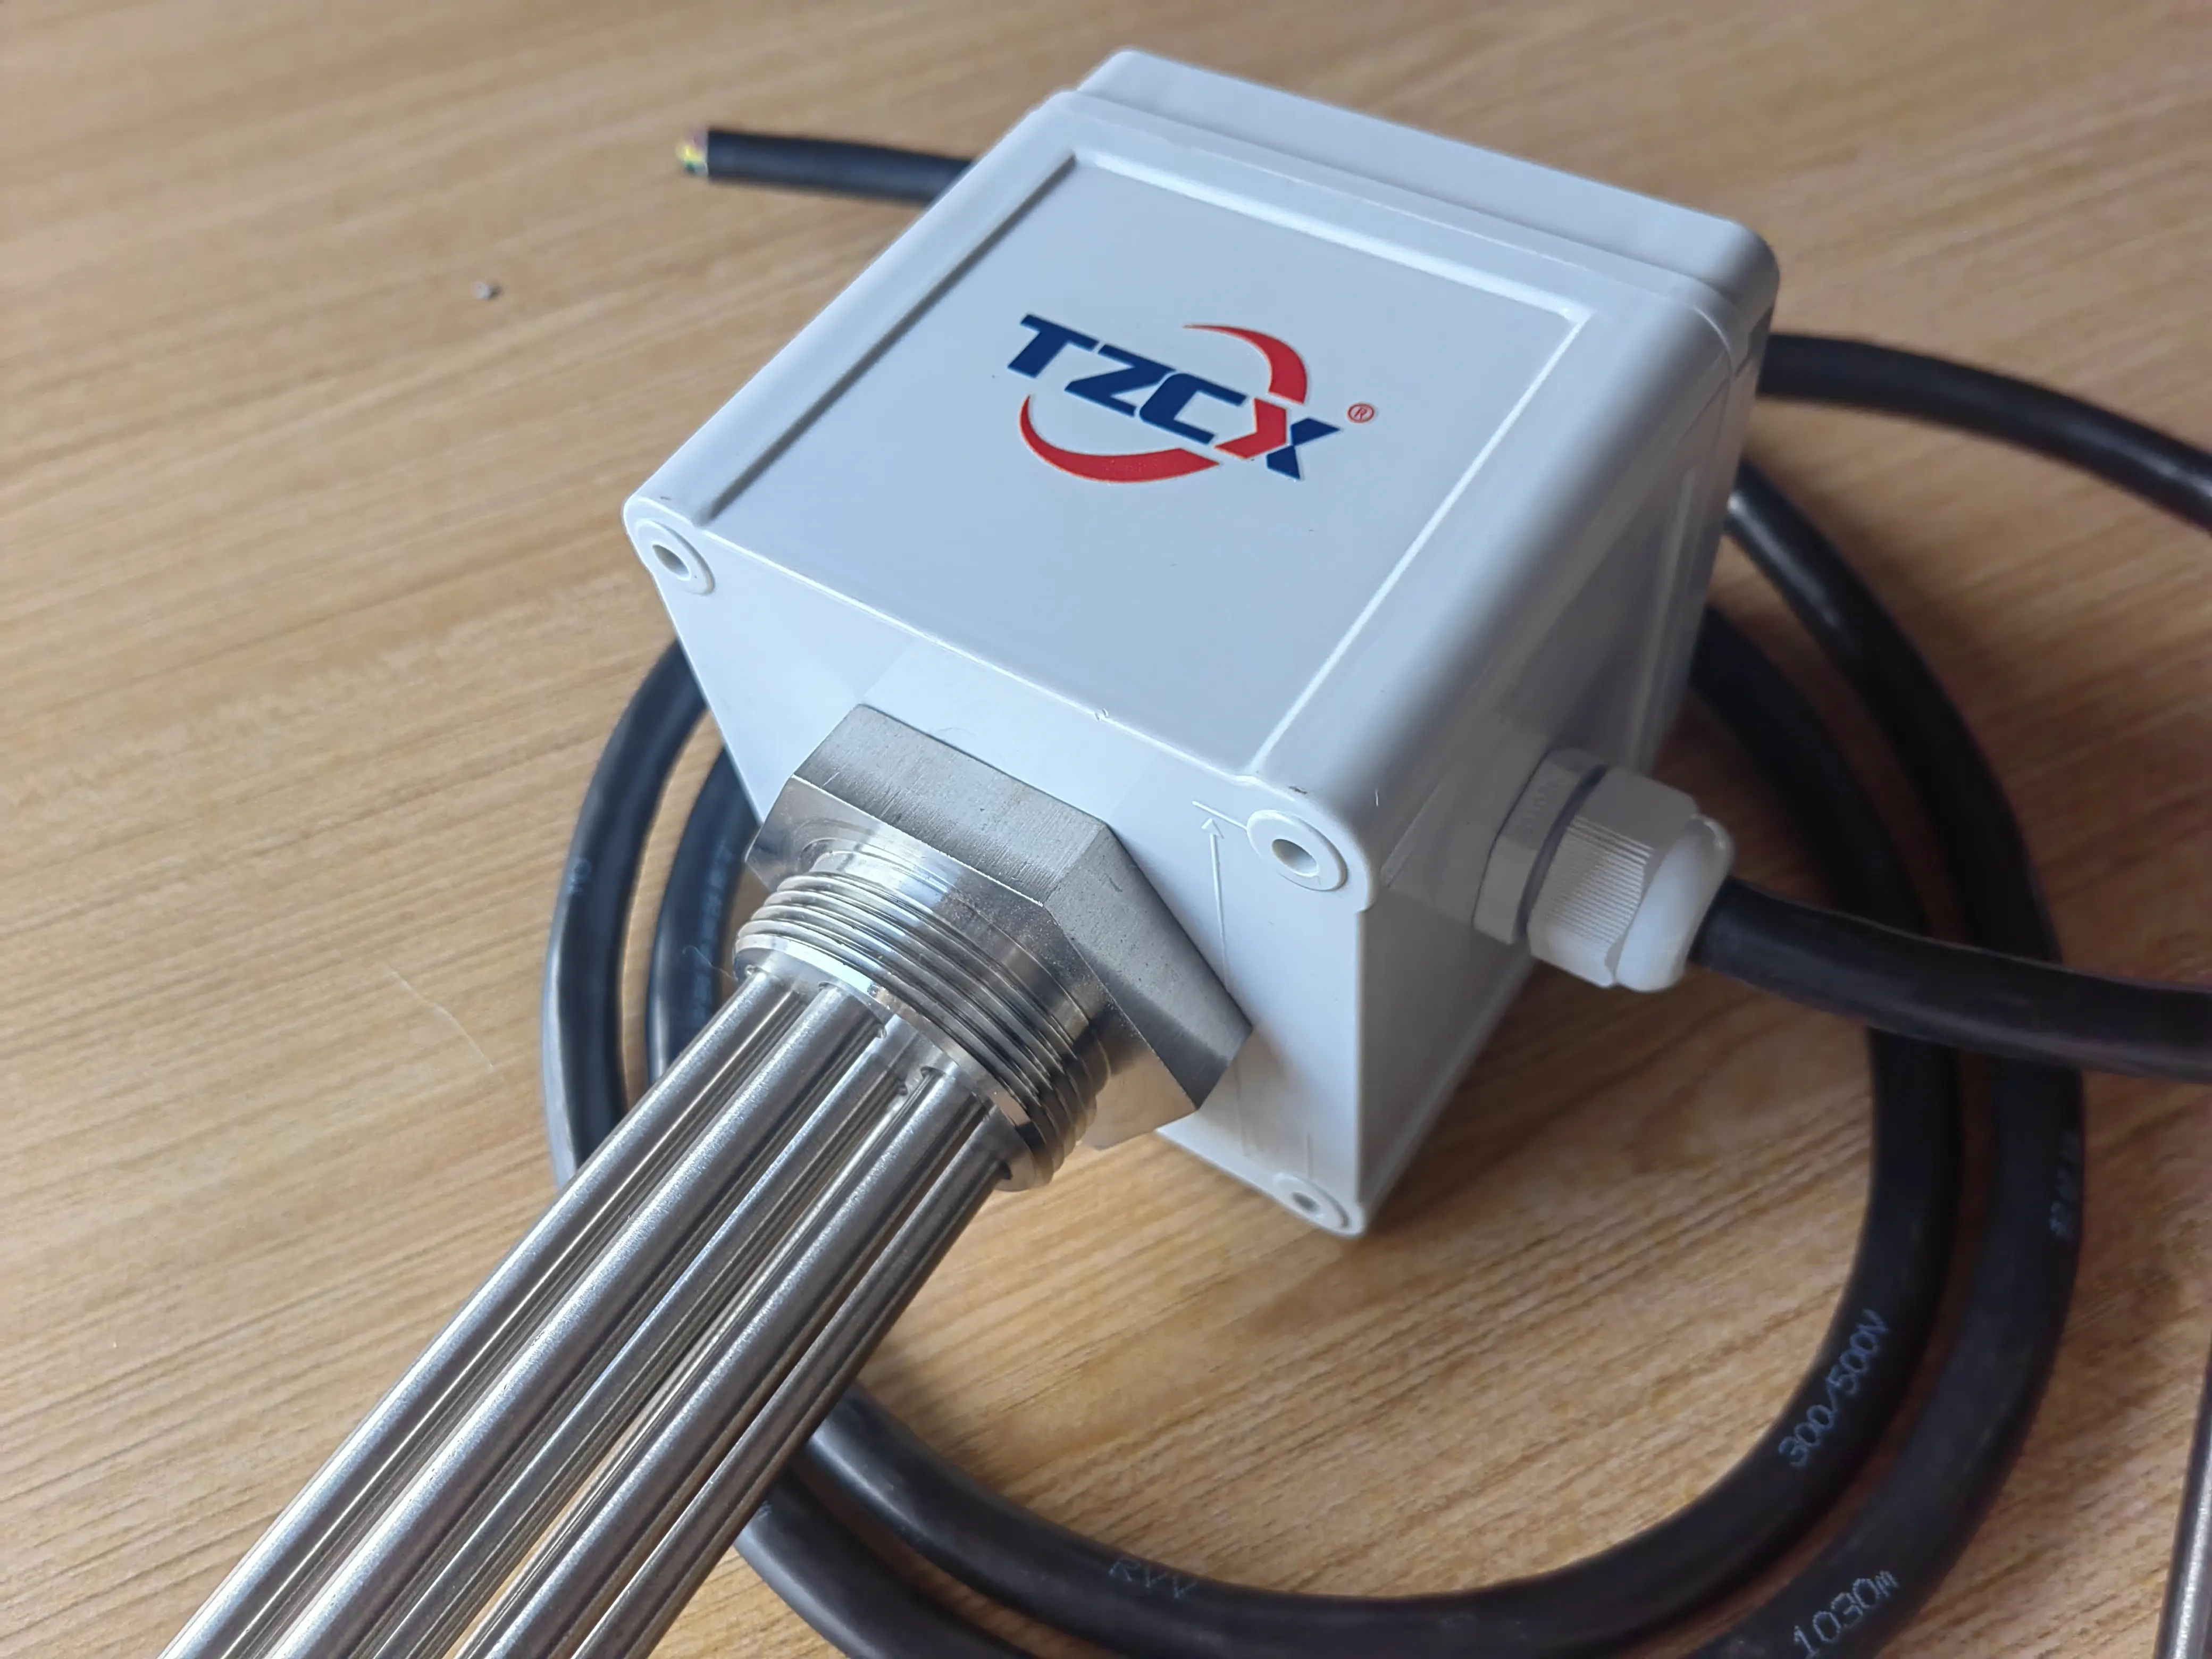 TZCX brand 230V/400V 2KW 3KW 5KW 6KW or custom electric water heater heating element with adjustable thermostat